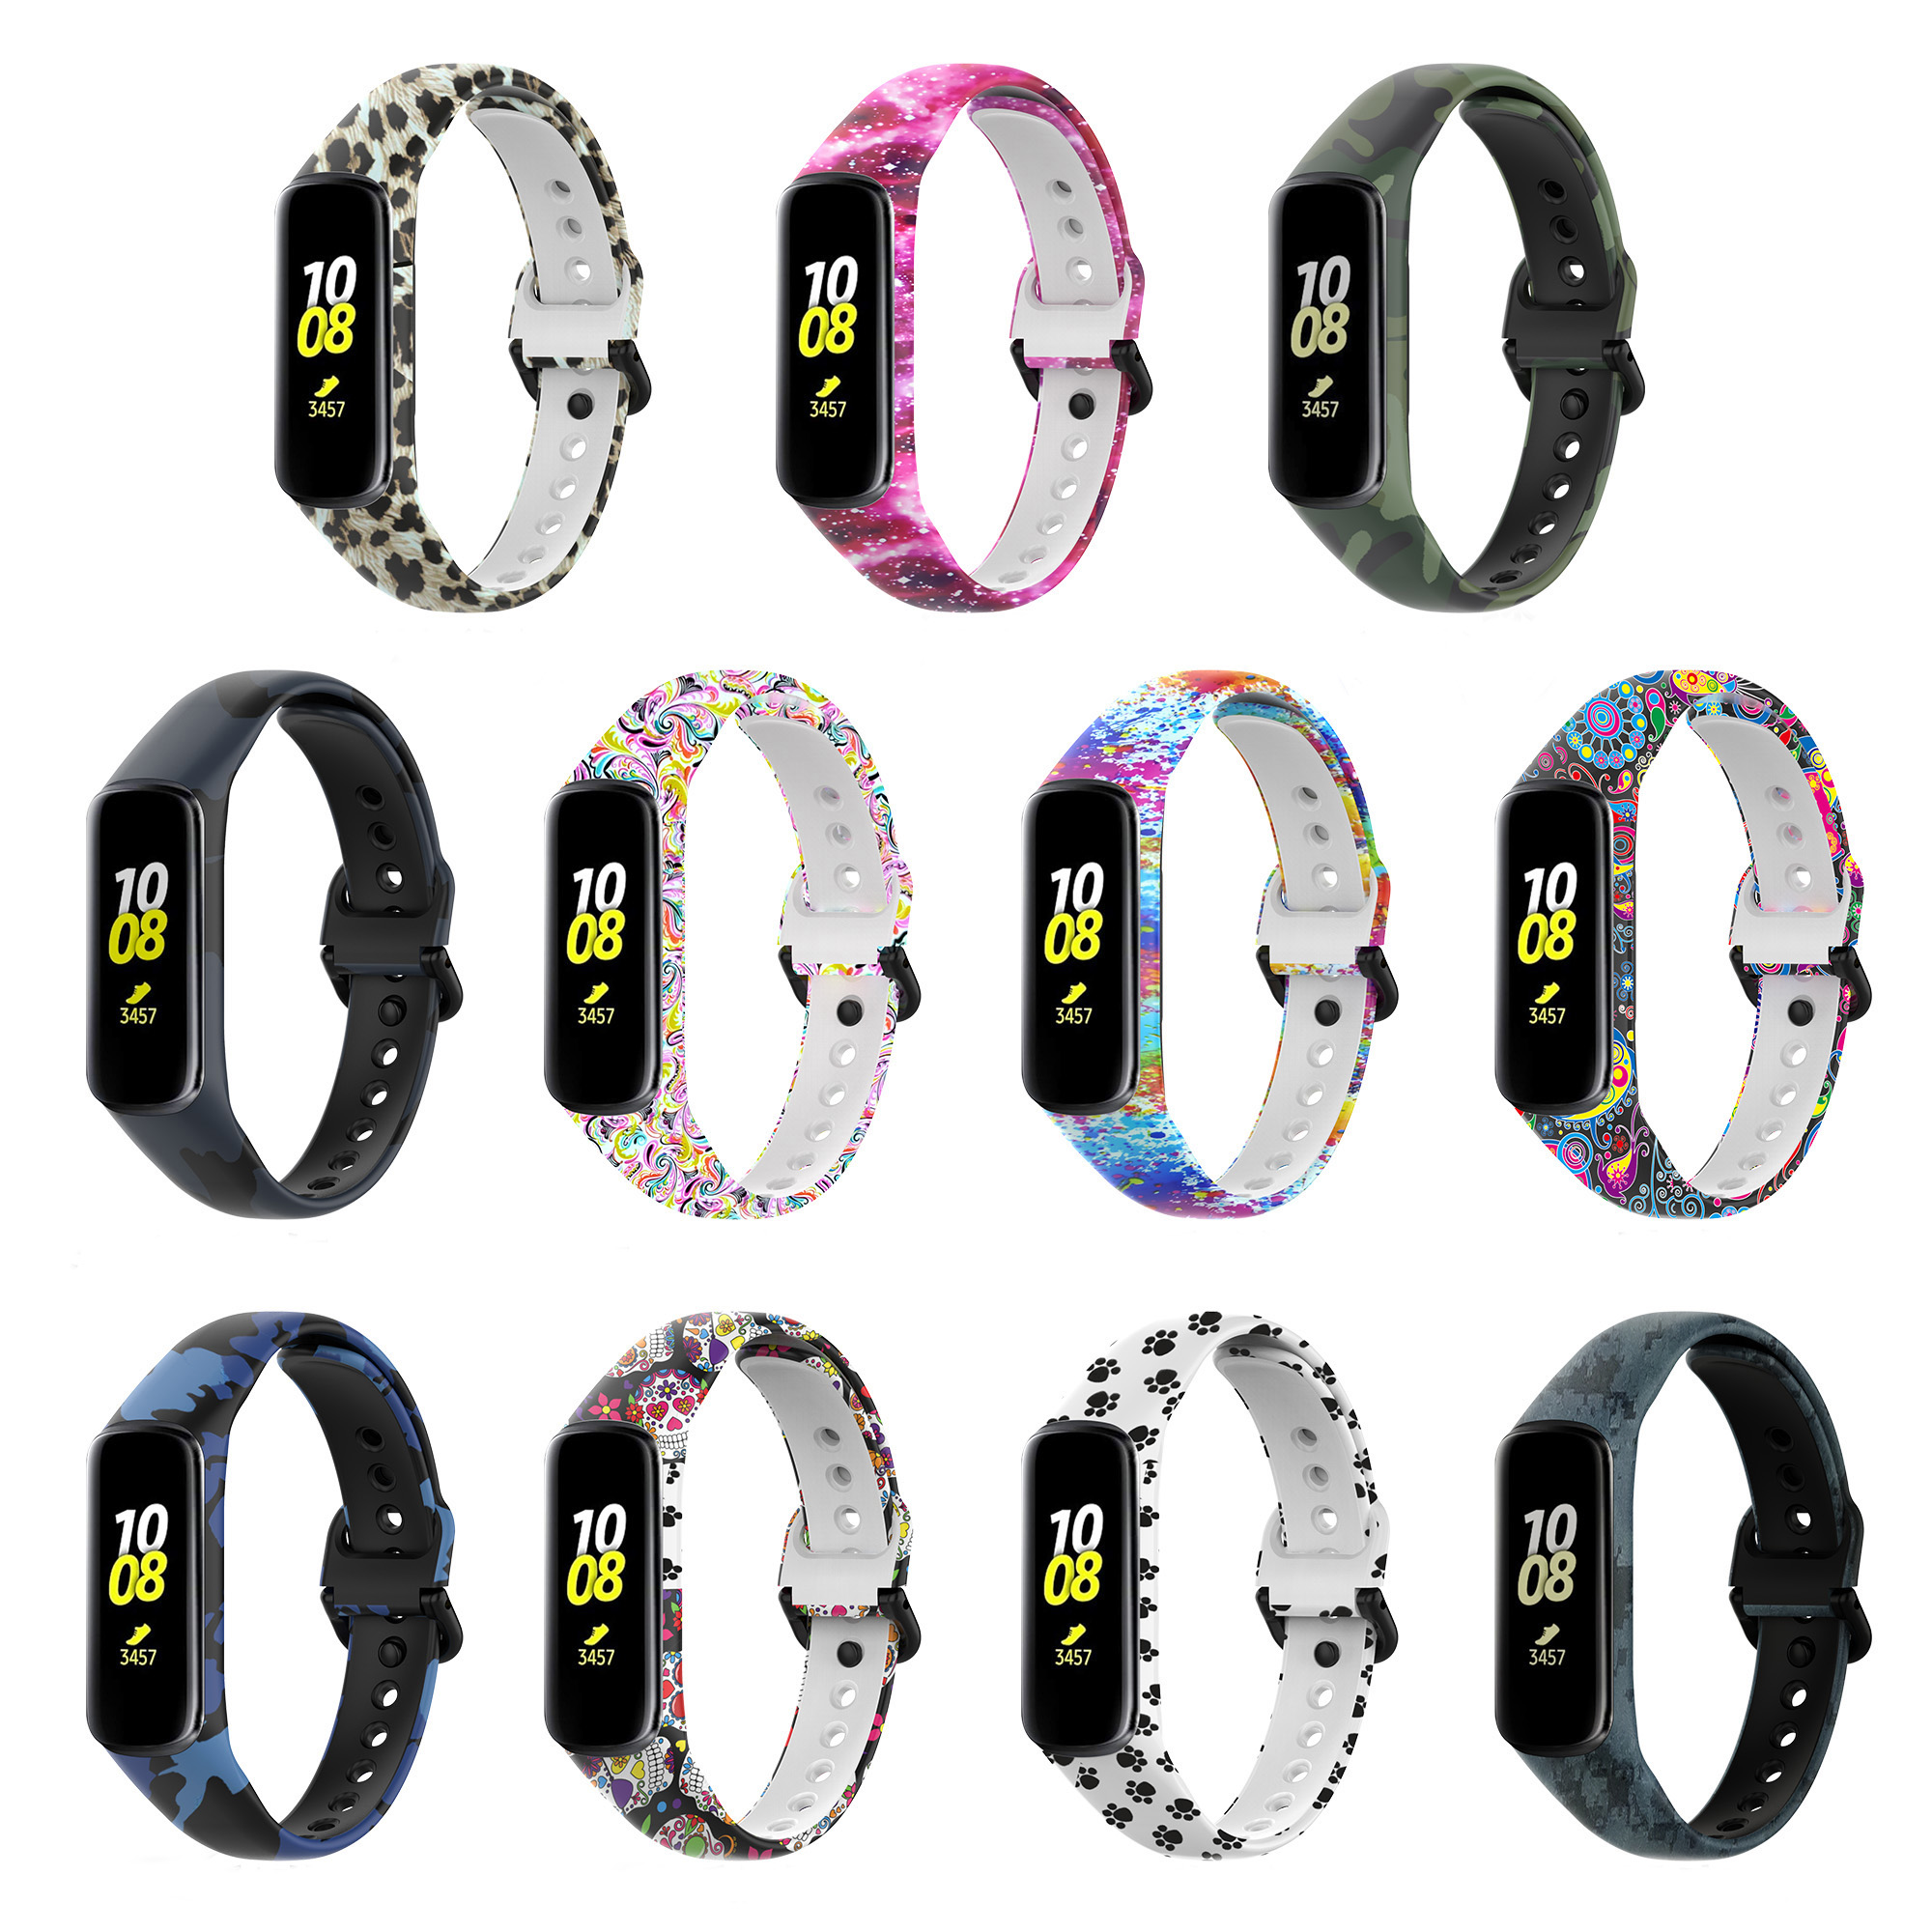 Bakeey-Printed-Pattern-Stainless-Steel-Buckle-Smart-watch-Band-Replacement-Strap-For-Samsung-Galaxy--1806217-1